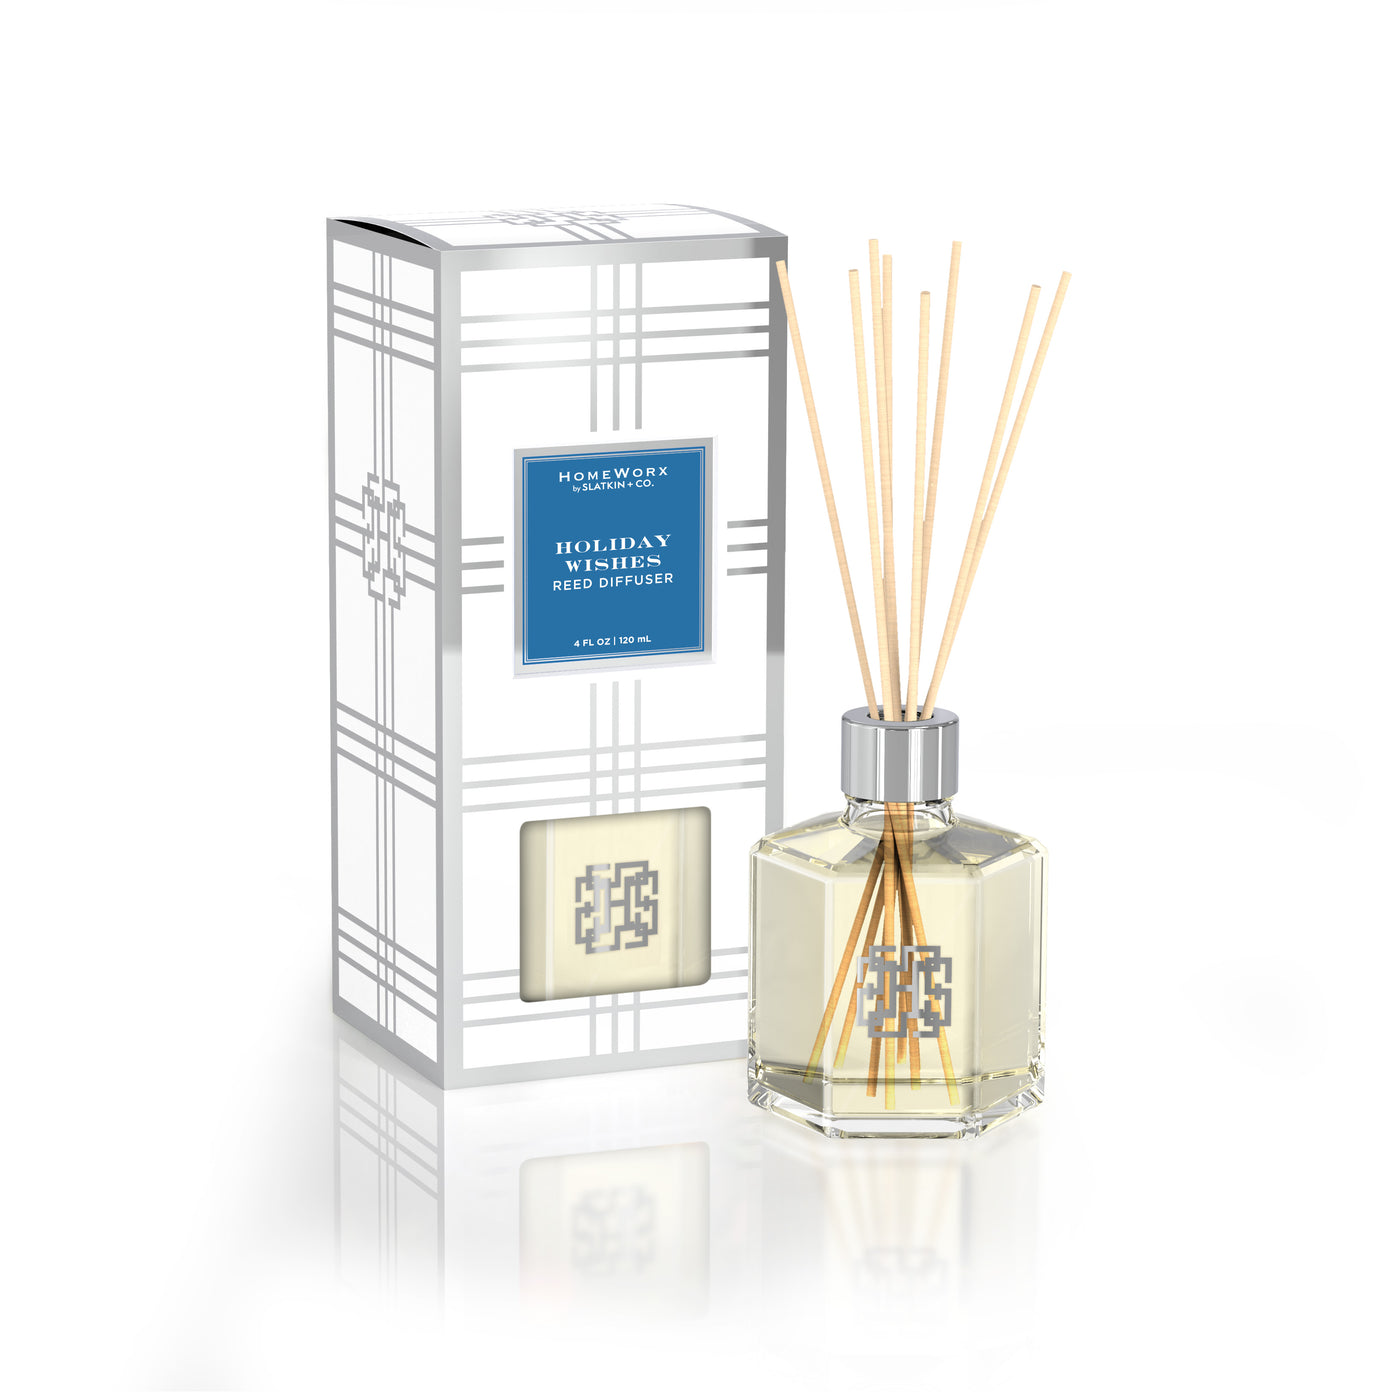 Holiday Wishes Diffuser